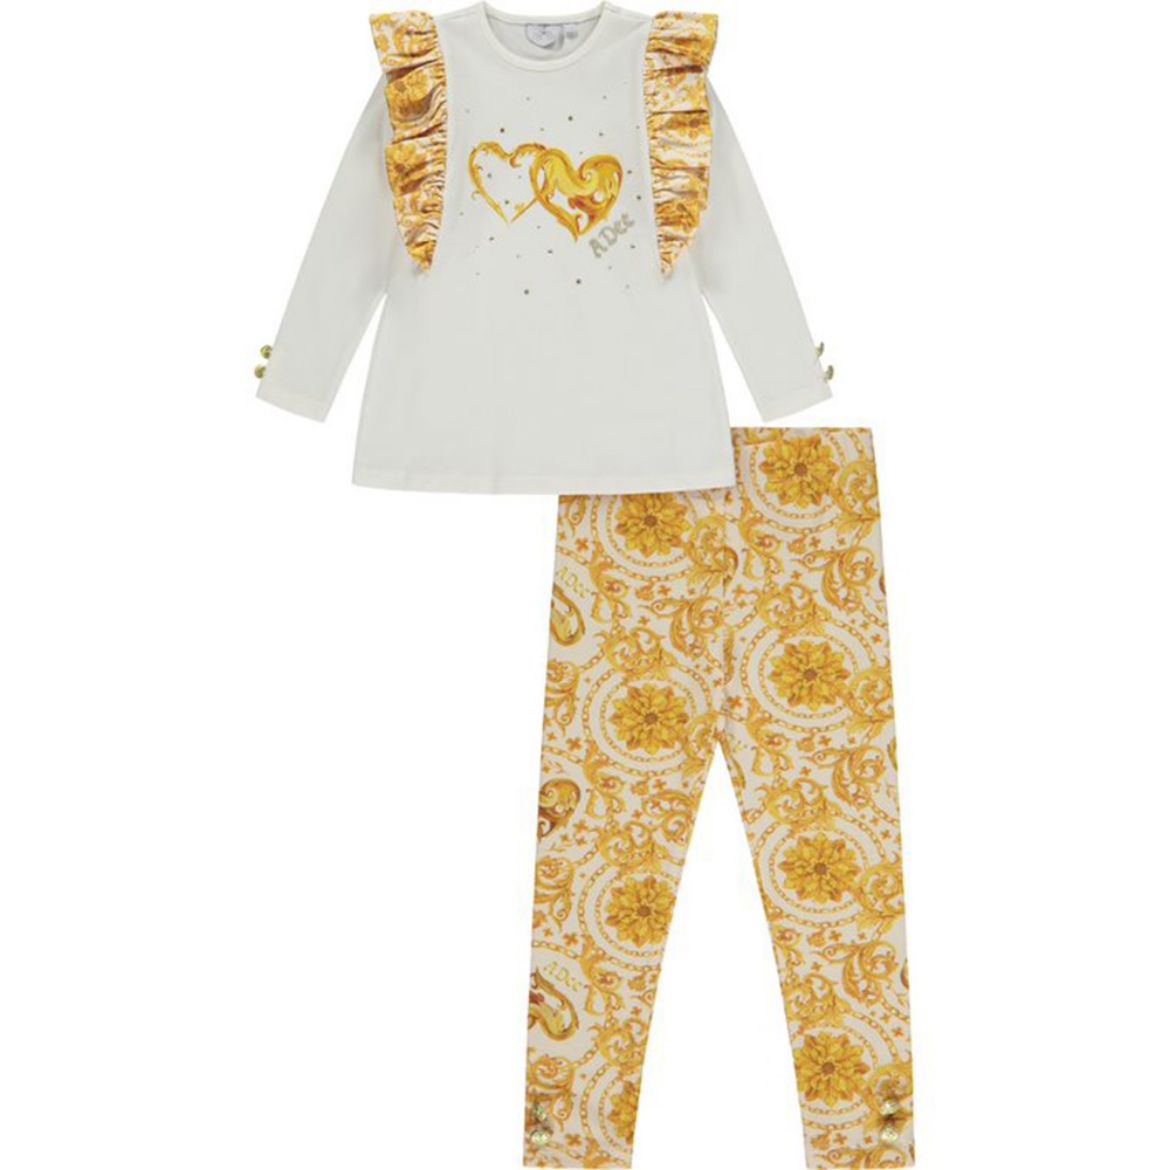 Picture of A Dee Girls 'Bunny' White Heart Legging Set